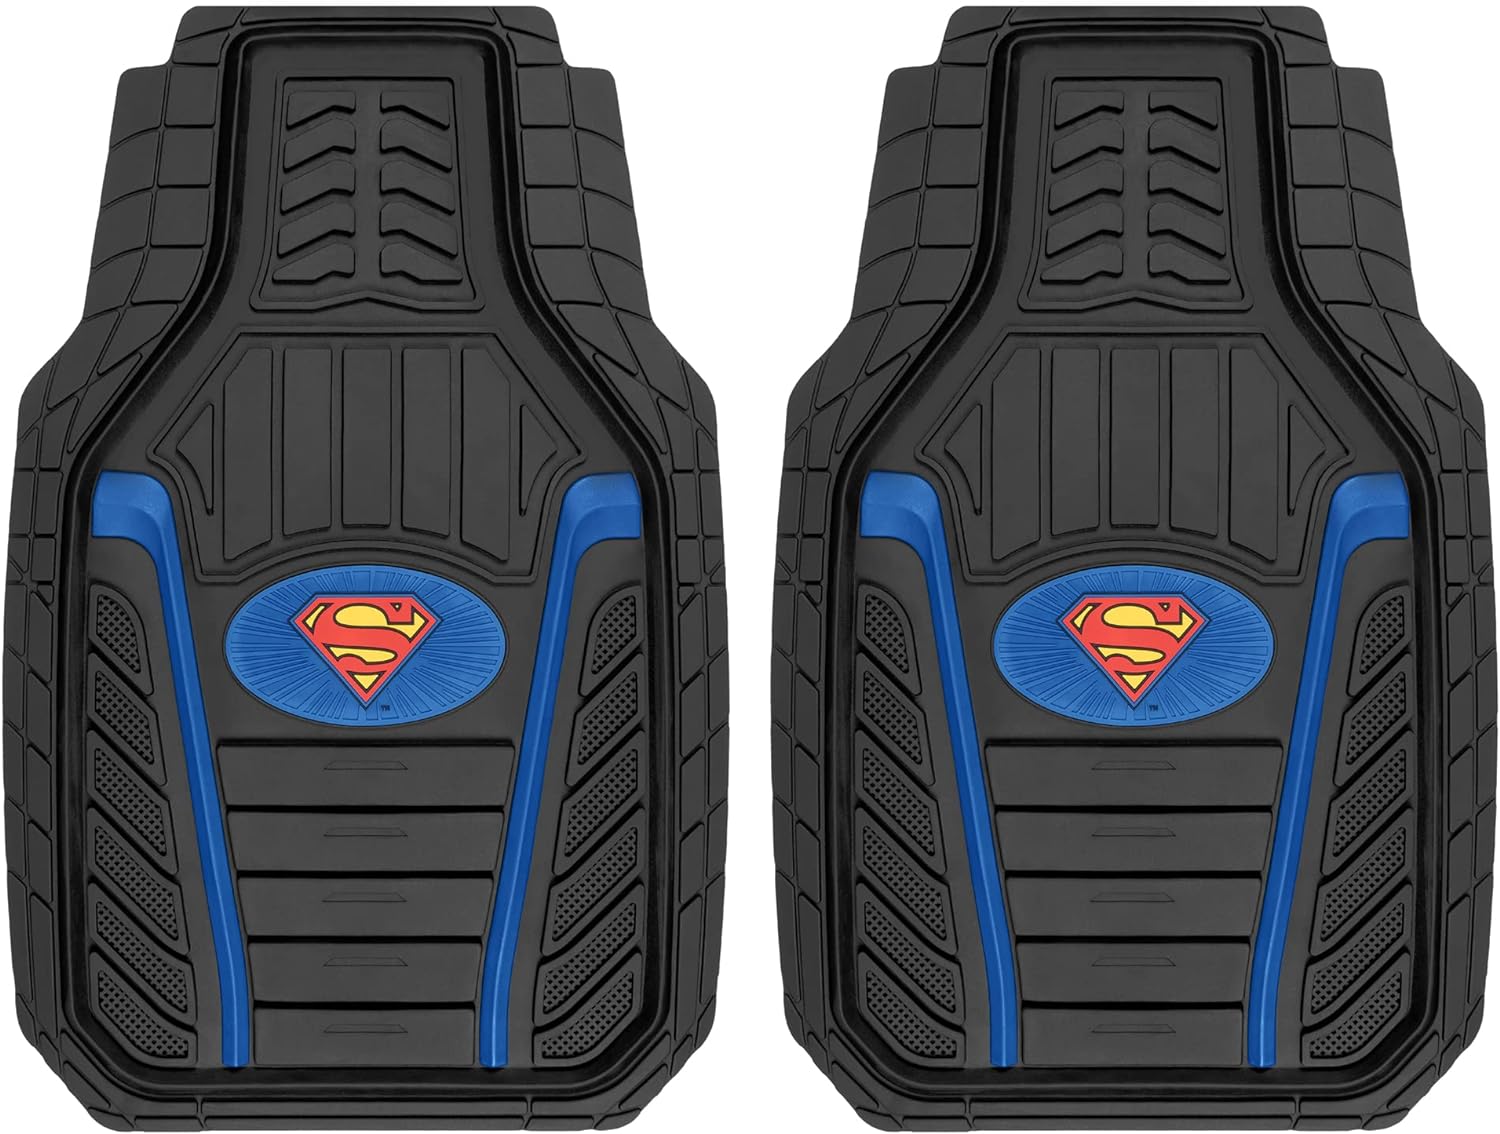 BDK Armored Super Hero Car Floor Mats - Officially Licensed DC Comics - All Weather Heavy Duty Auto Interior Liners for Car Truck Van SUV (Multiple Styles) - Armored Superman